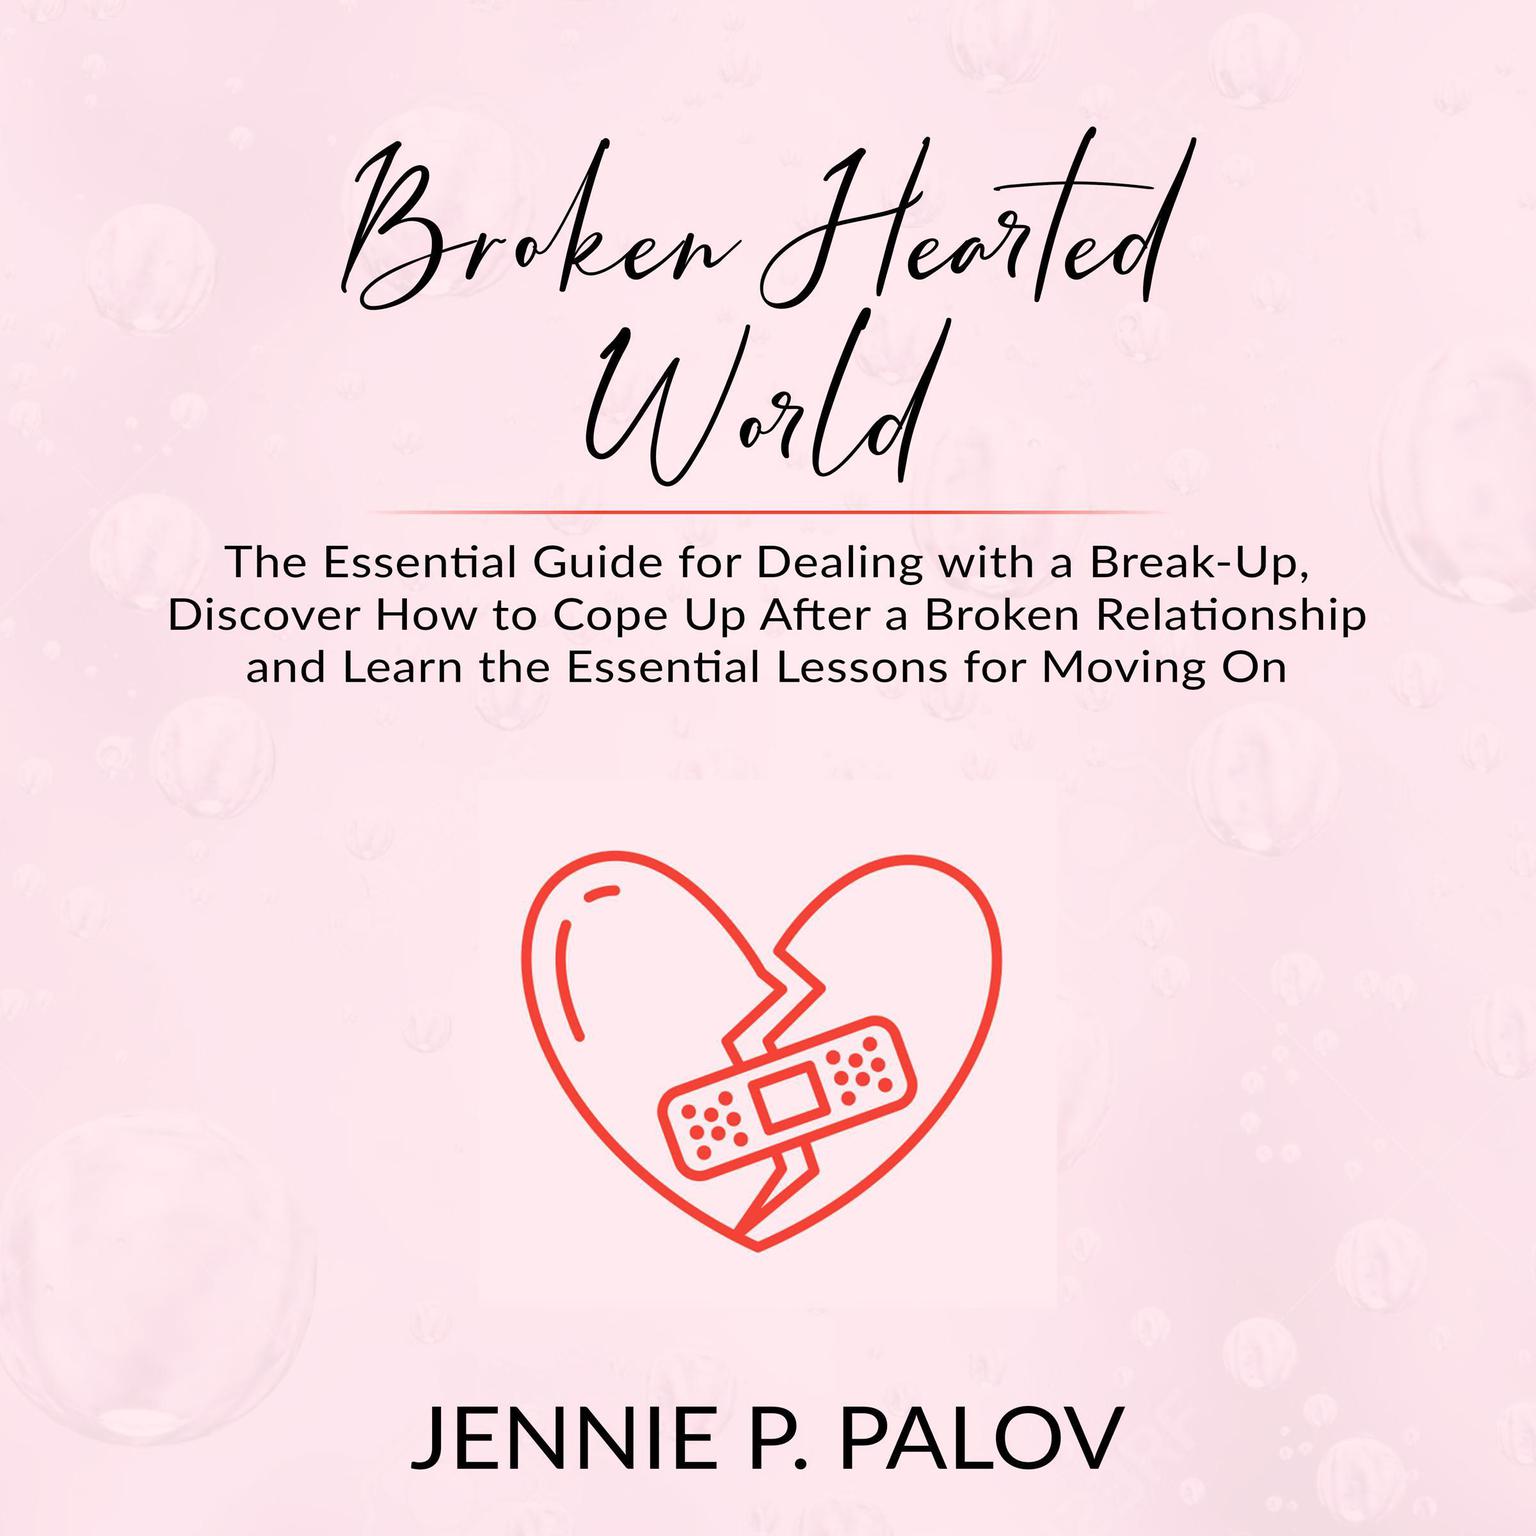 Broken Hearted World: The Essential Guide for Dealing with a Break-Up, Discover How to Cope Up After a Broken Relationship and Learn the Essential Lessons for Moving On Audiobook, by Jennie P. Palov